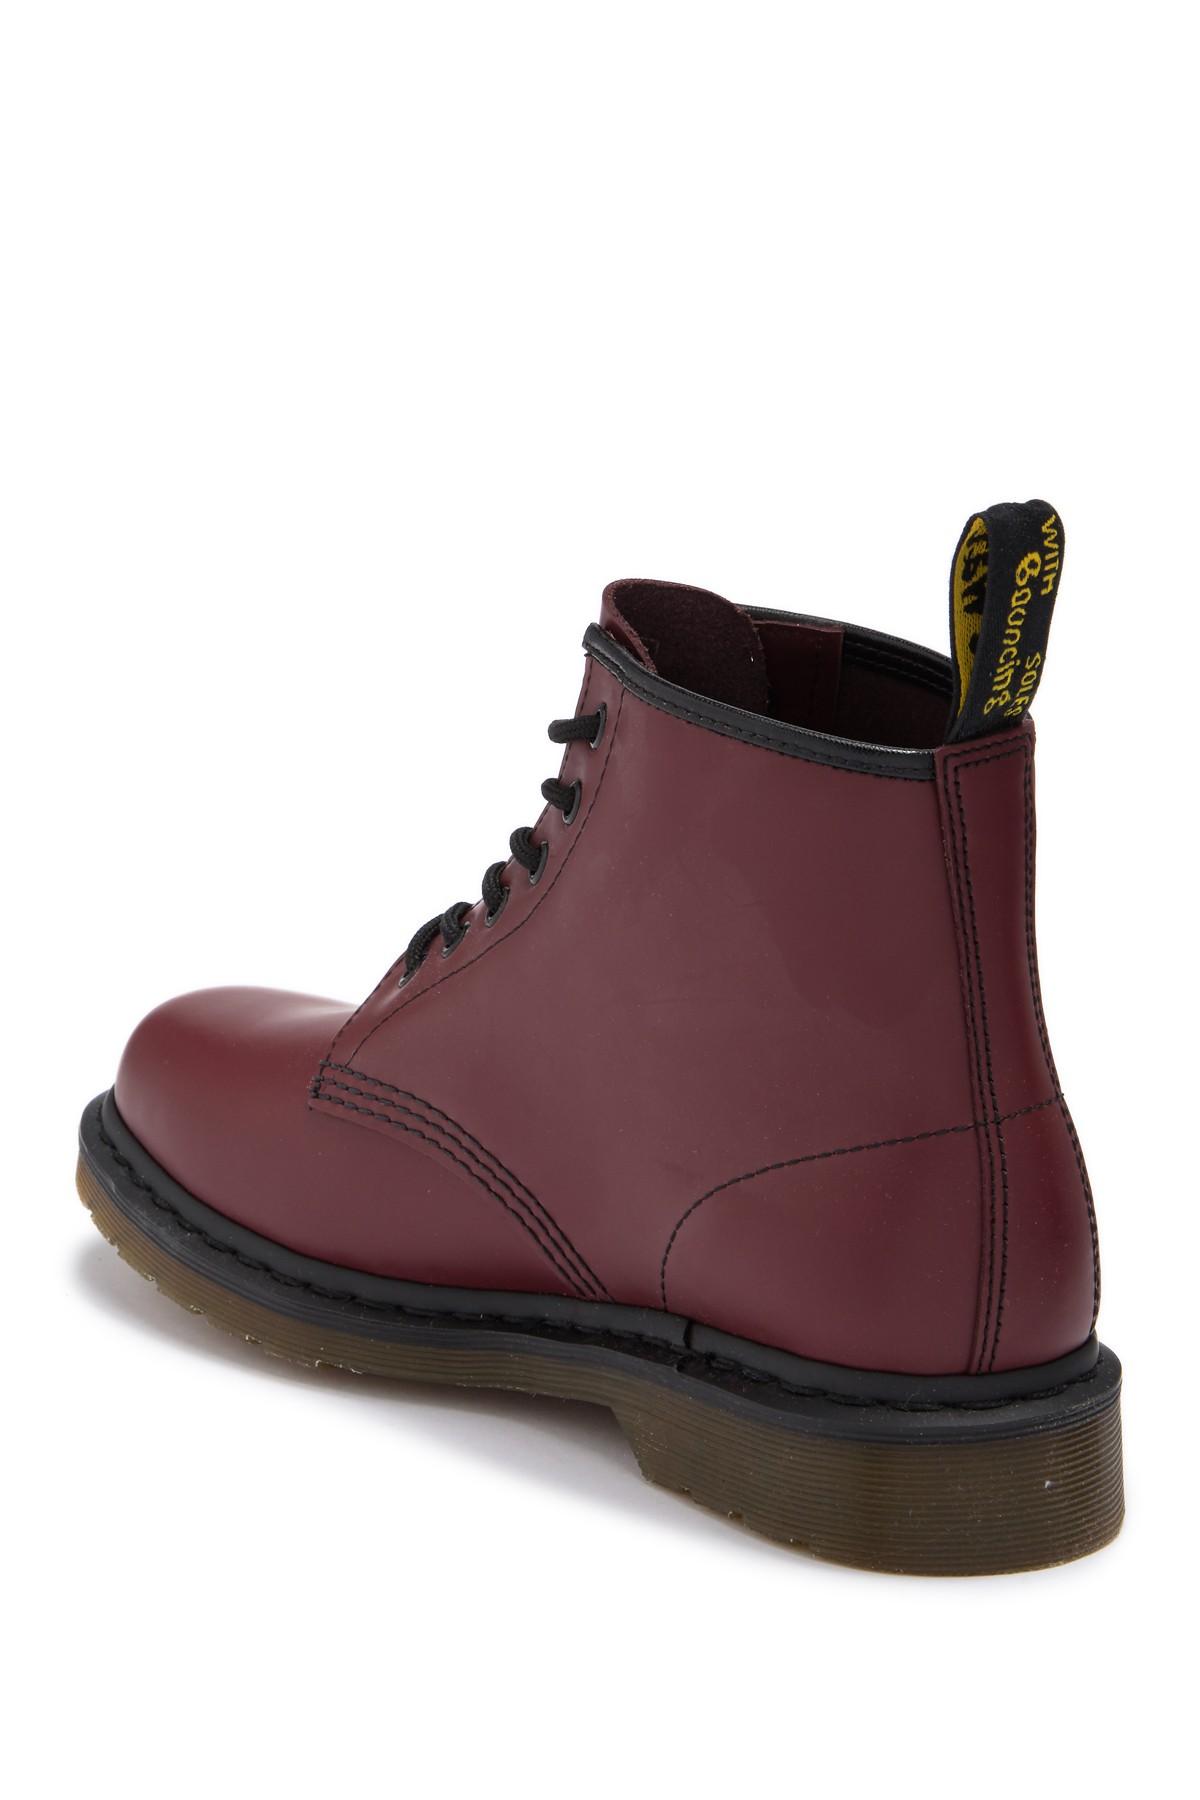 Dr. Martens 6-eye Cherry Leather Boot in Cherry Red (Red) for Men | Lyst